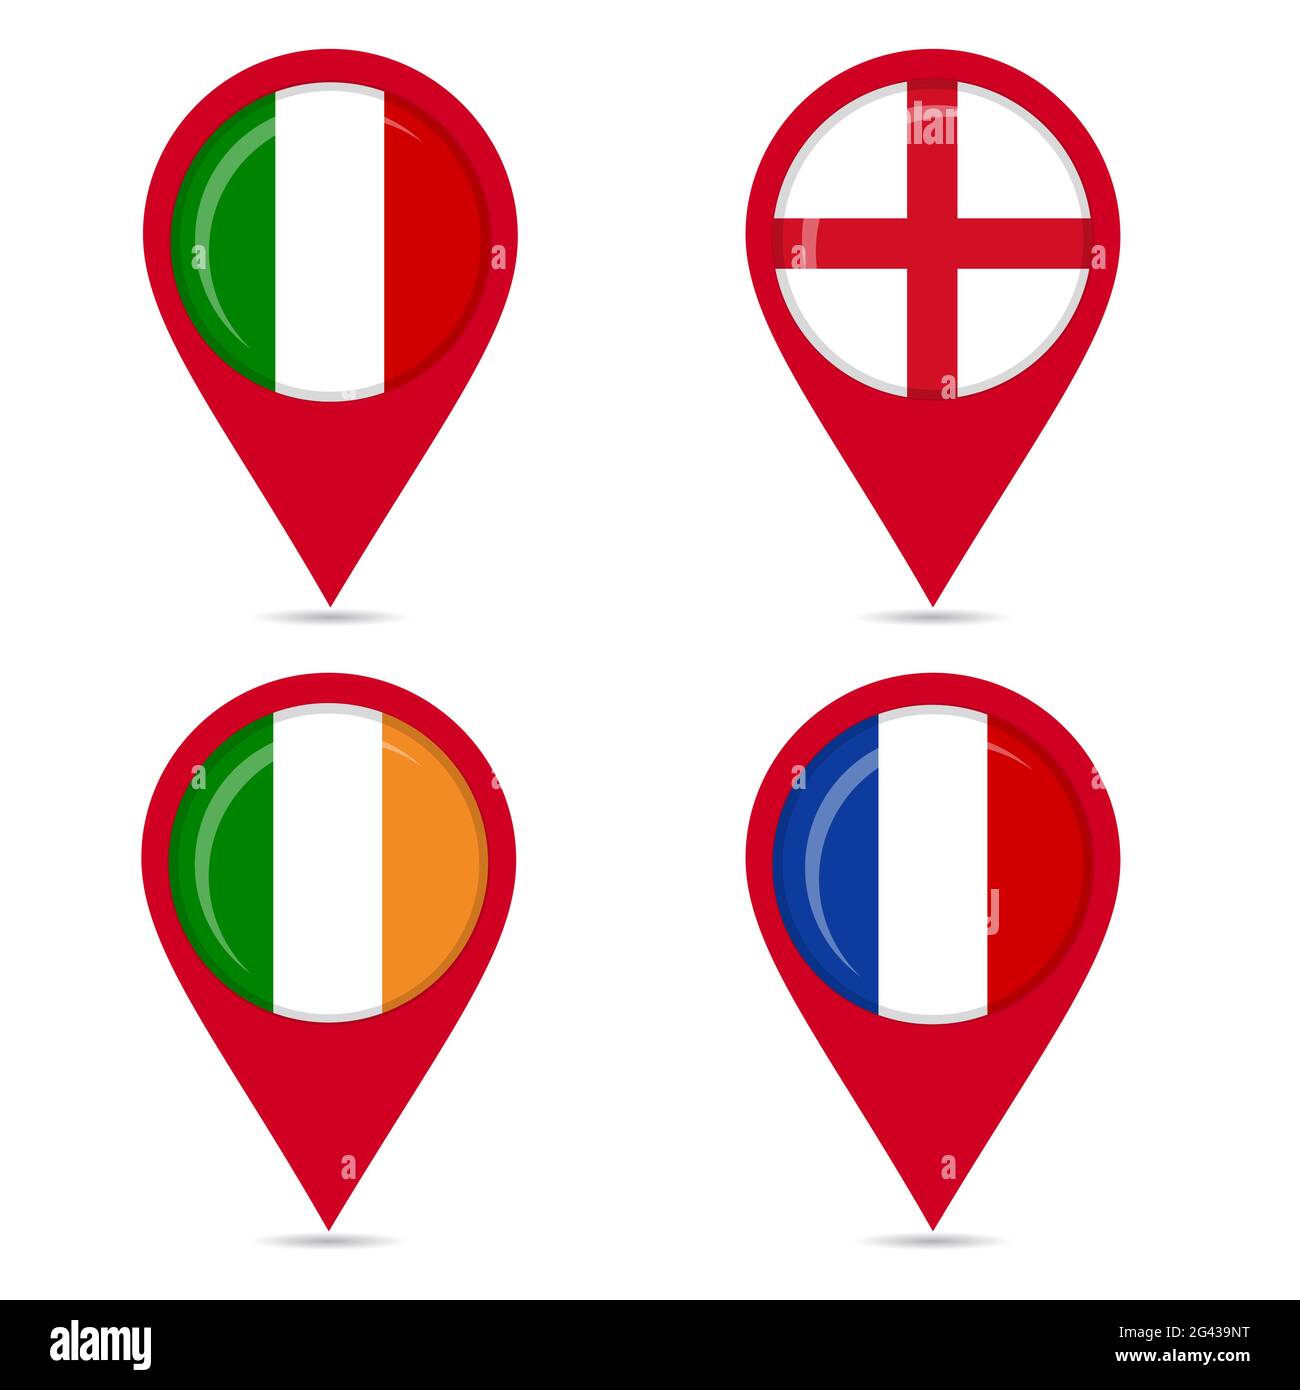 Map pin icons of national flags: Italy, England, France, Ireland. White background. Stock Vector